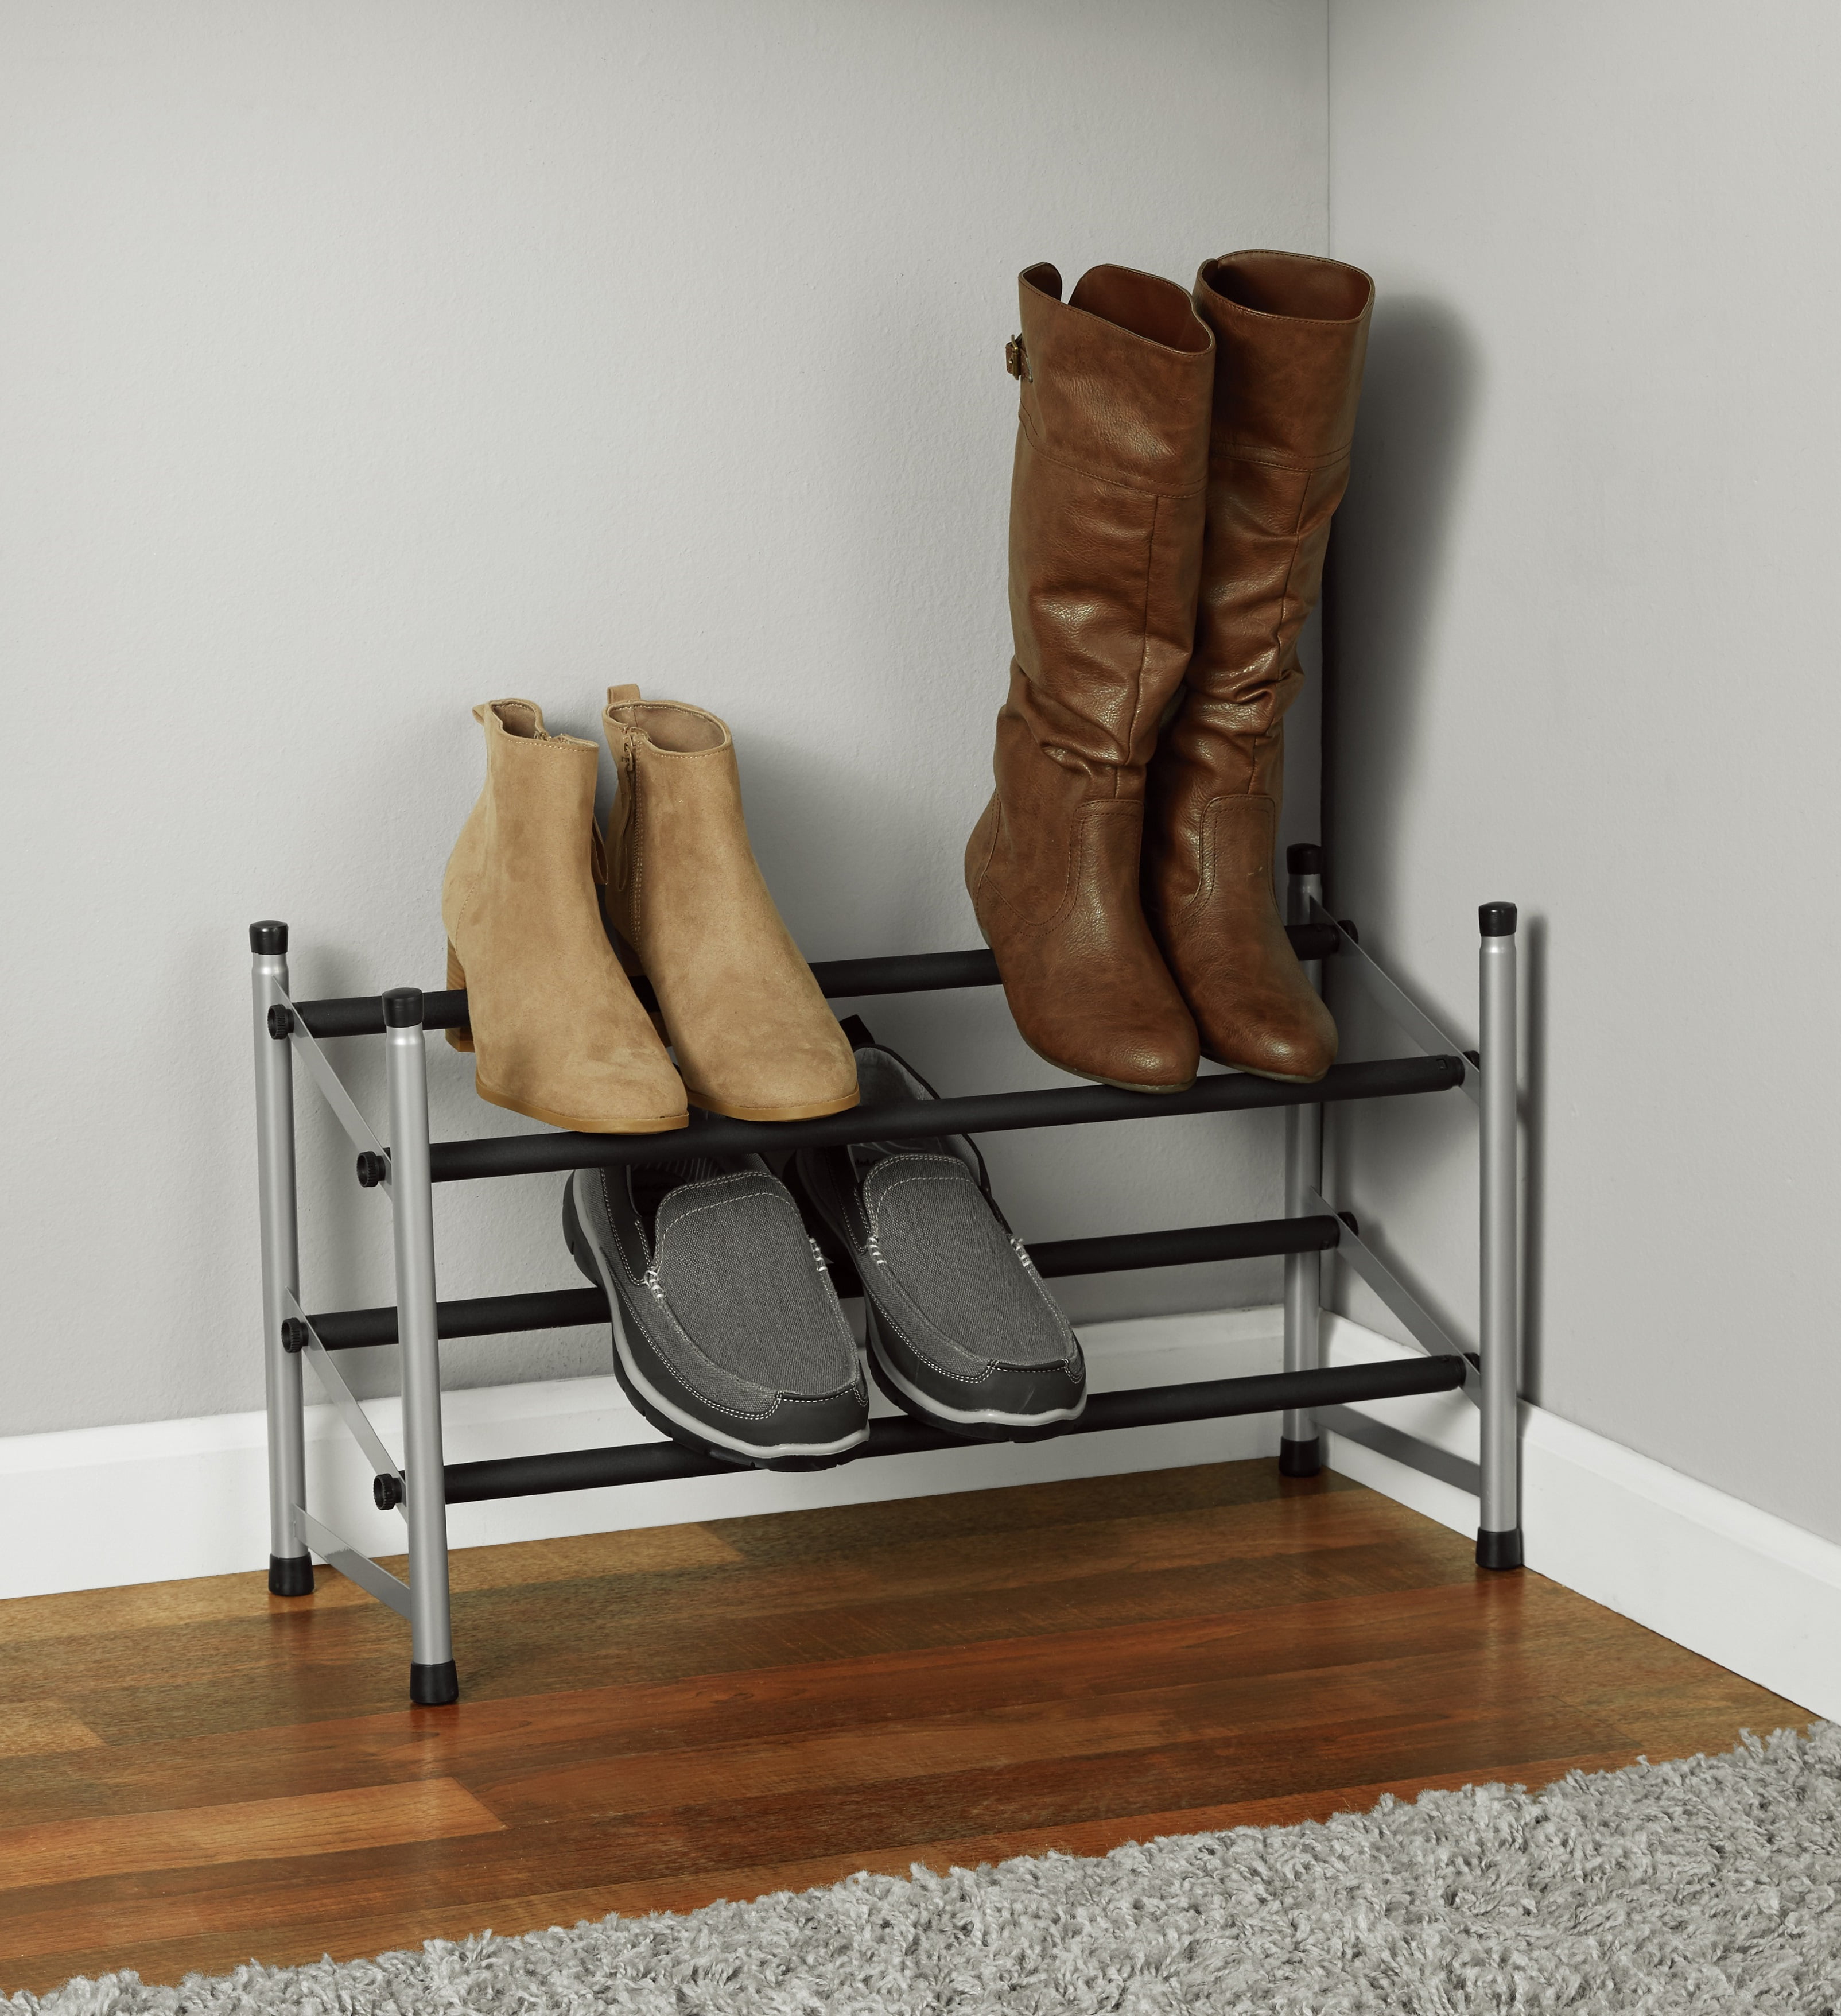 Mainstays 10-Tier Rolling Shoe Rack, Silver Finish, up to 30 Pair of Shoes  shoe organizer